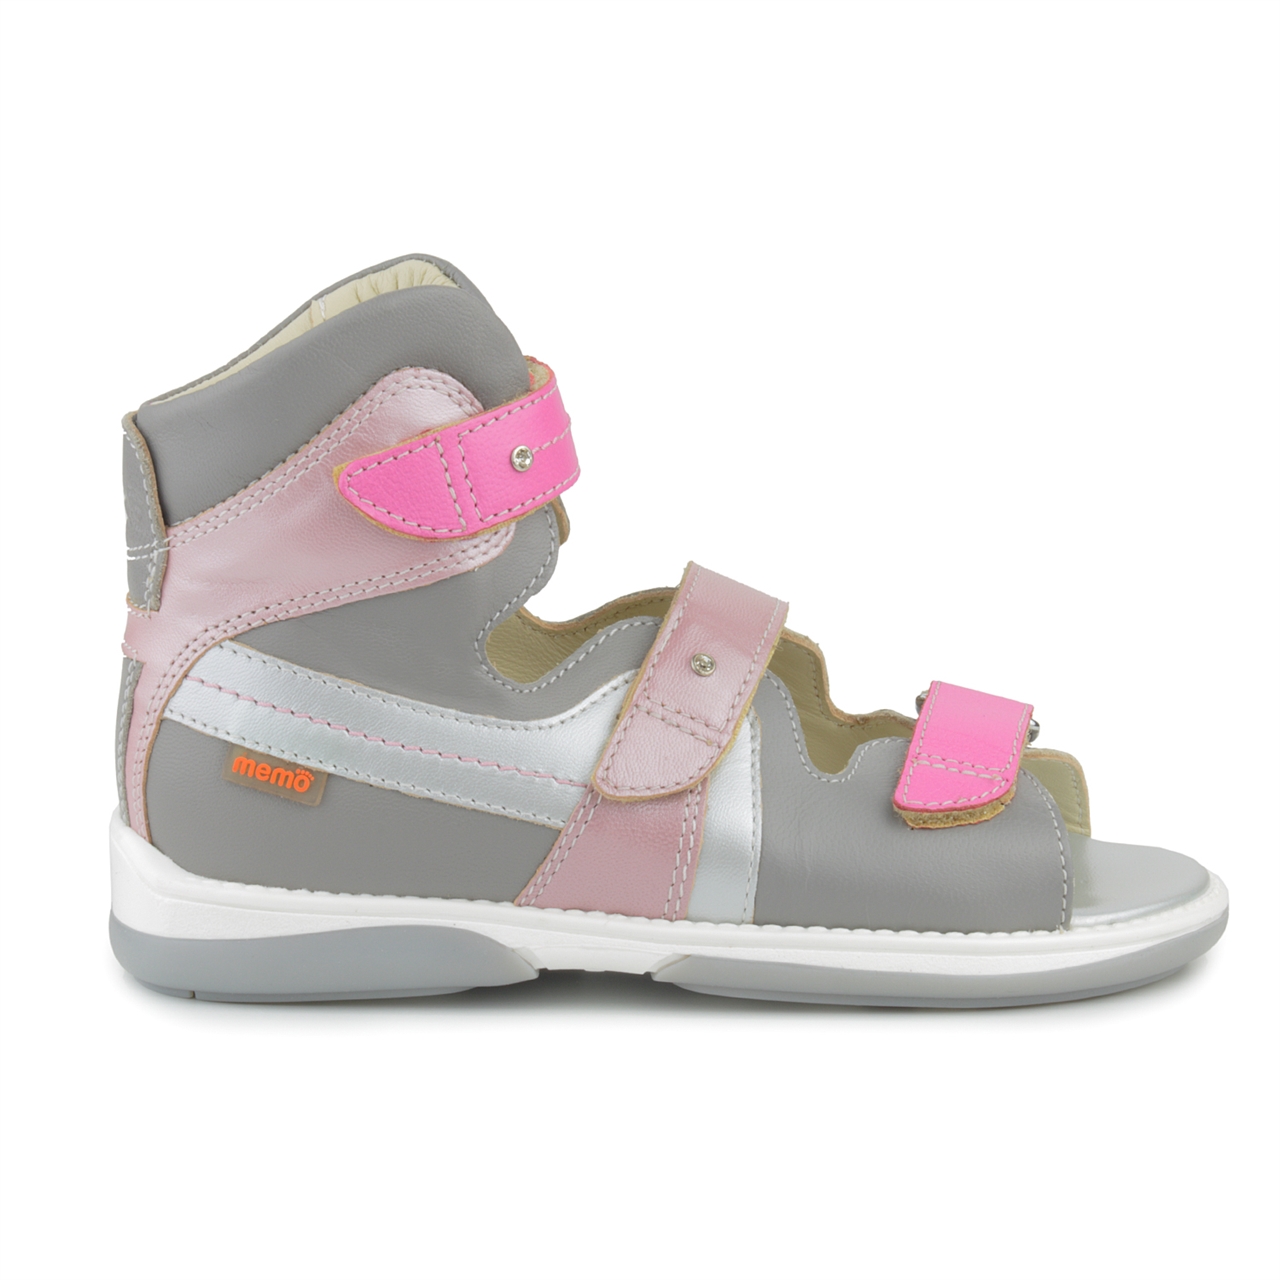 Details about   RenBut Girls Pink Orthopedic Support Leather Shoes 13-1511 Amarant Made in Pol 